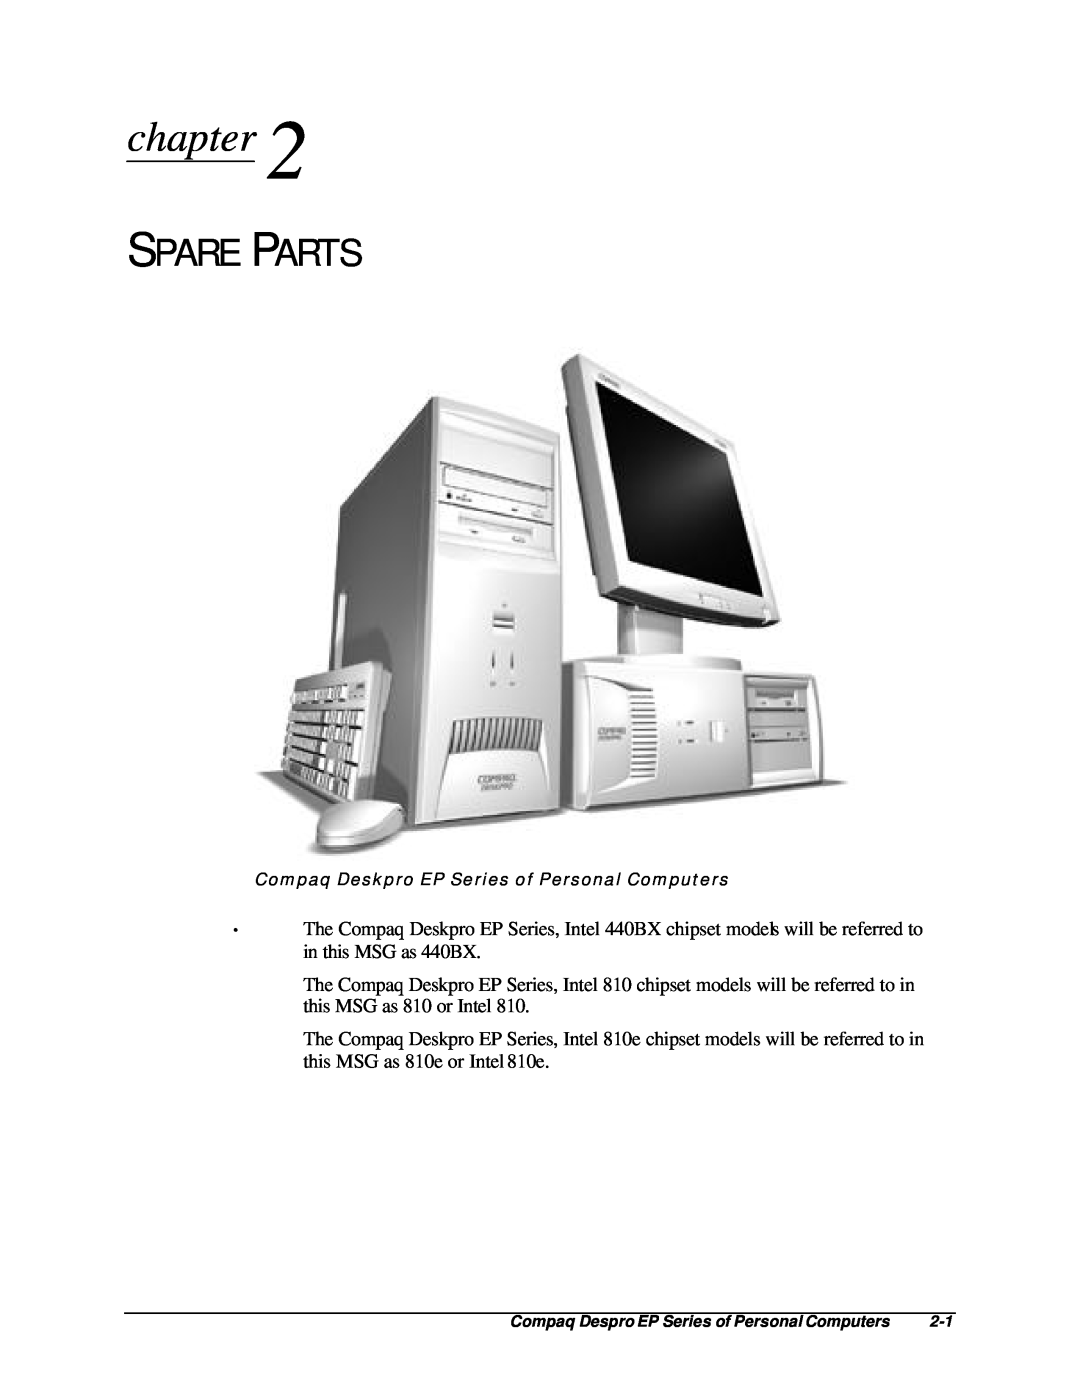 Compaq EP Series manual chapter, Spare Parts 